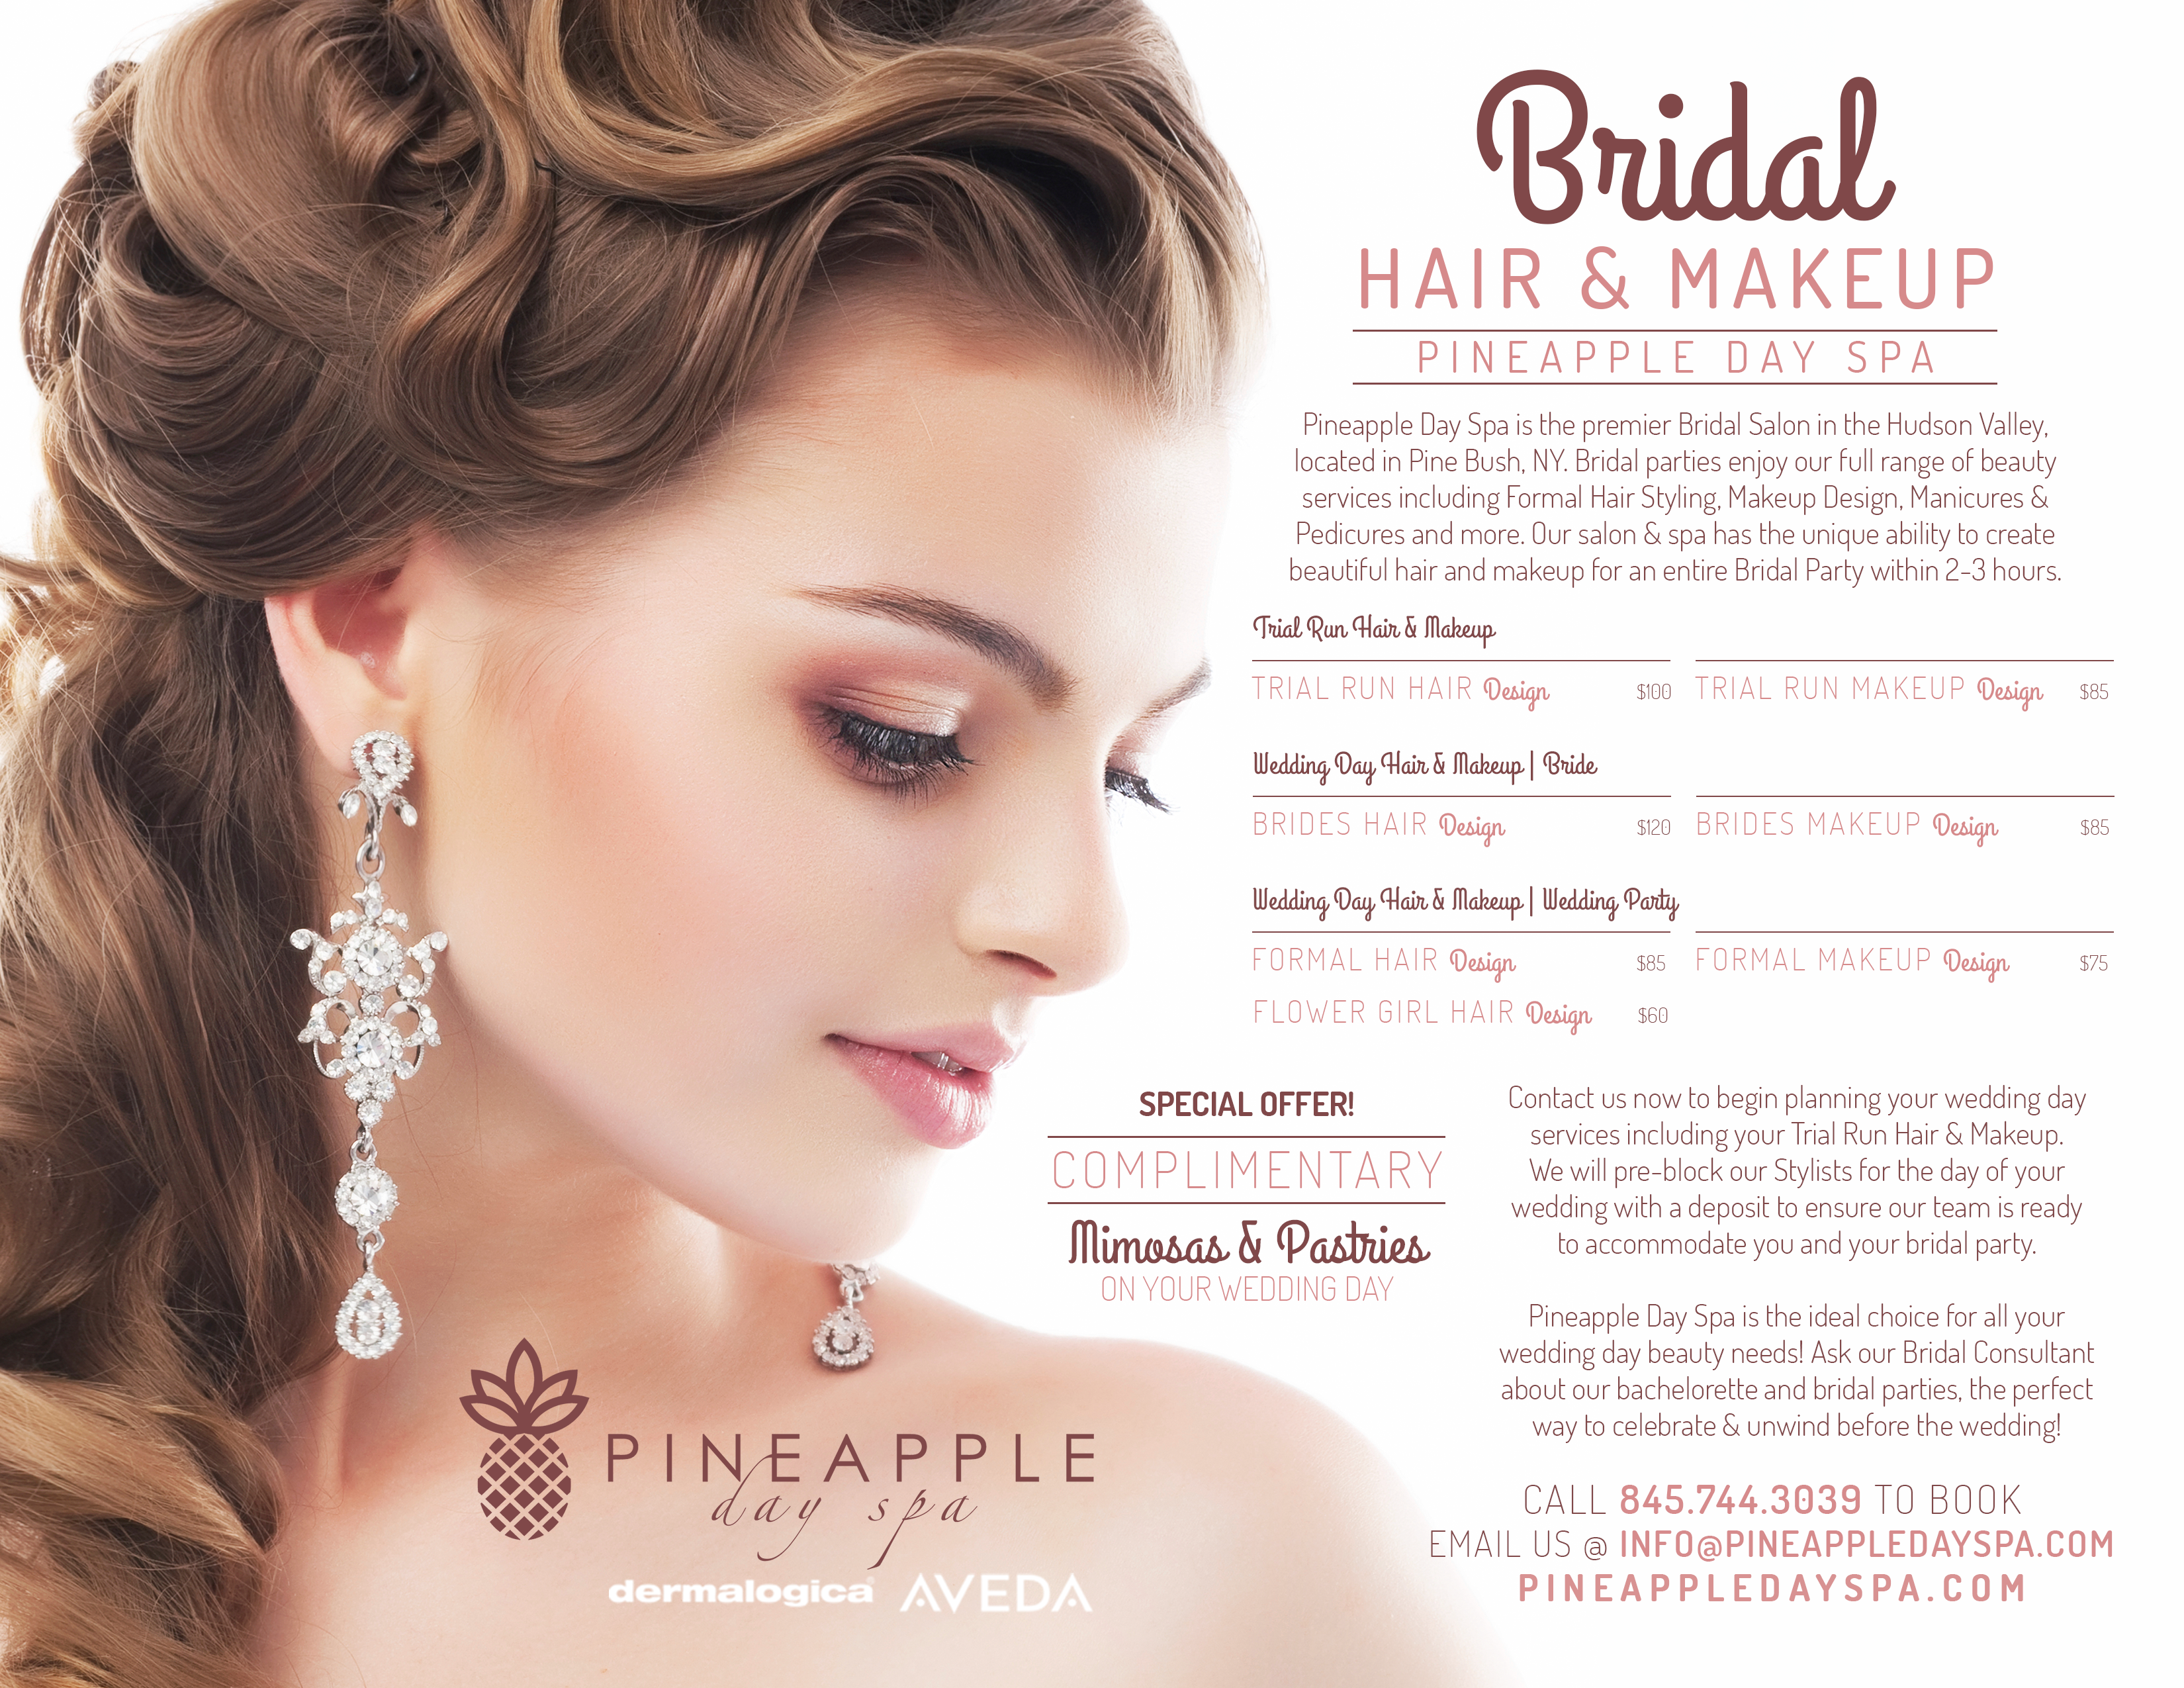 Bridal Pineapple Day Spa